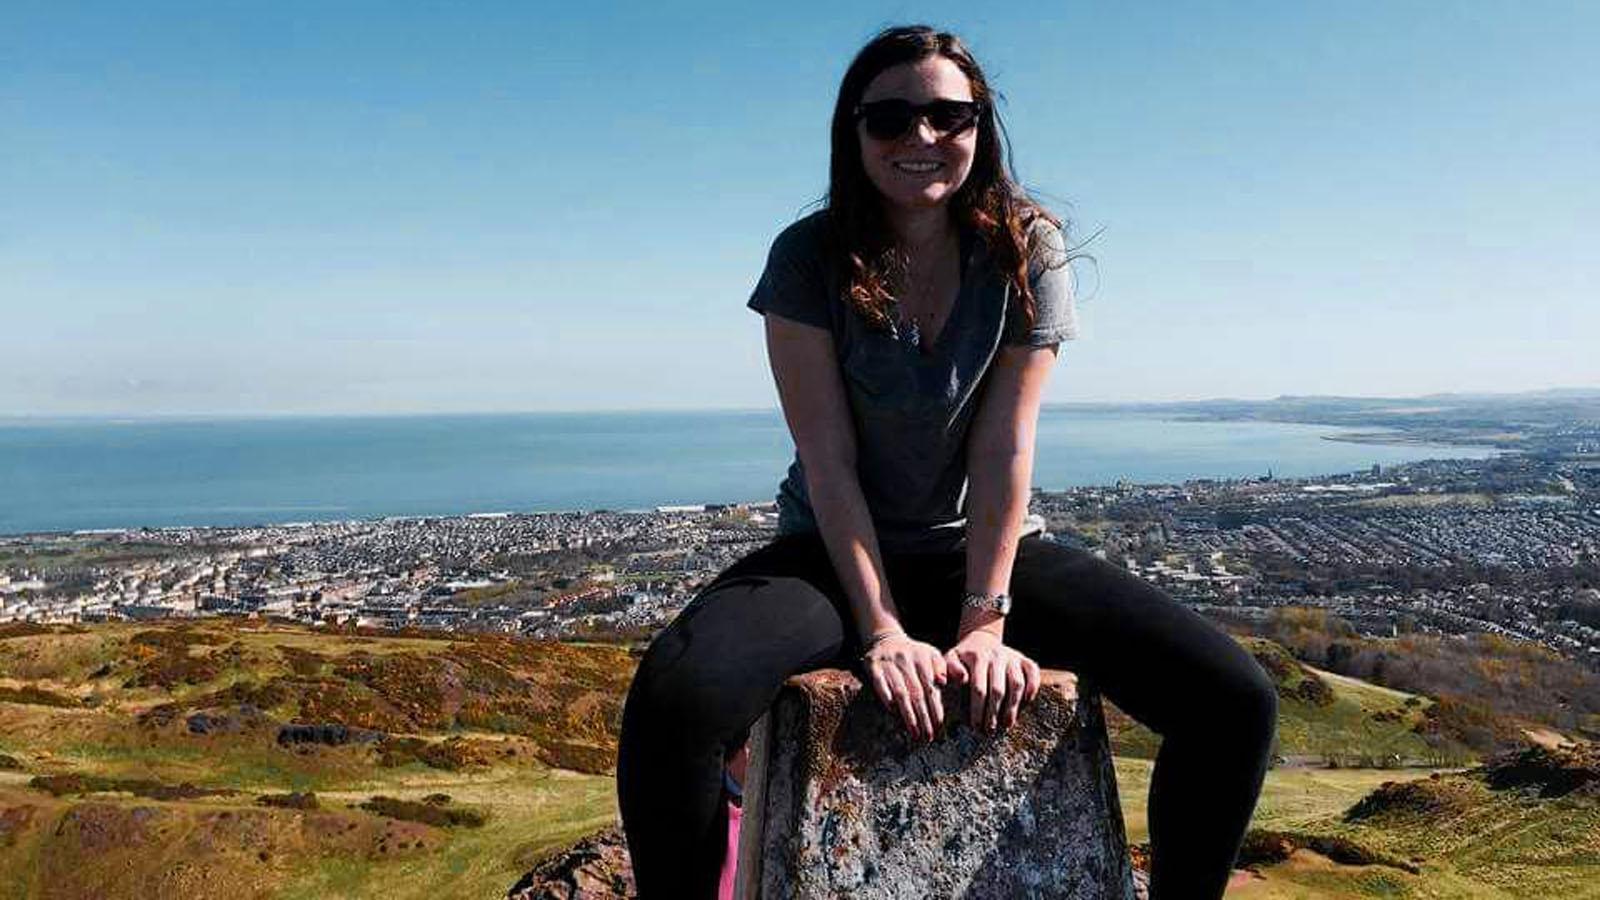 Lubin student Wendy Smith '16 semester abroad in Ireland trip photo